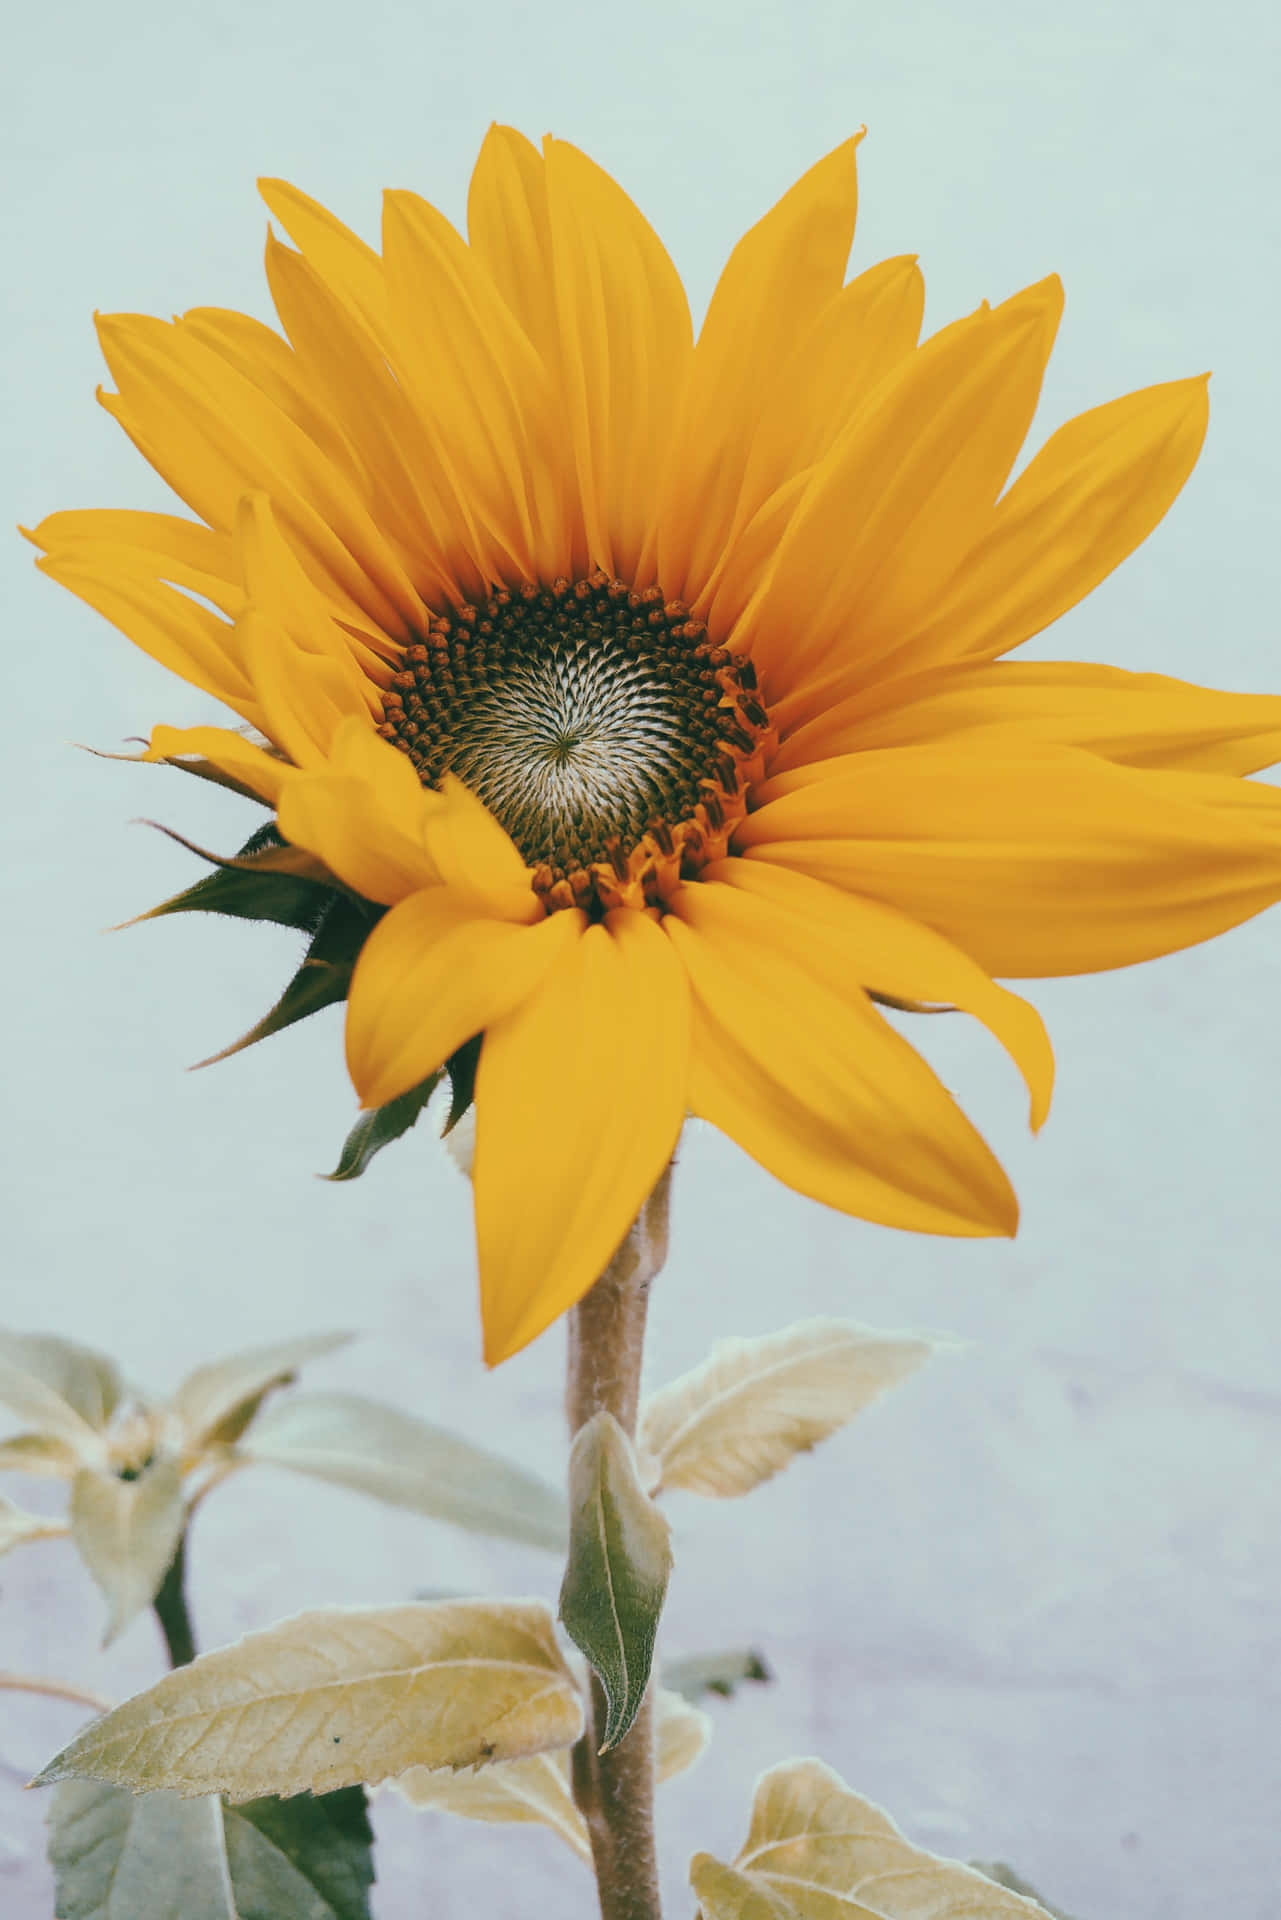 A Yellow Sunflower In A Vase Wallpaper